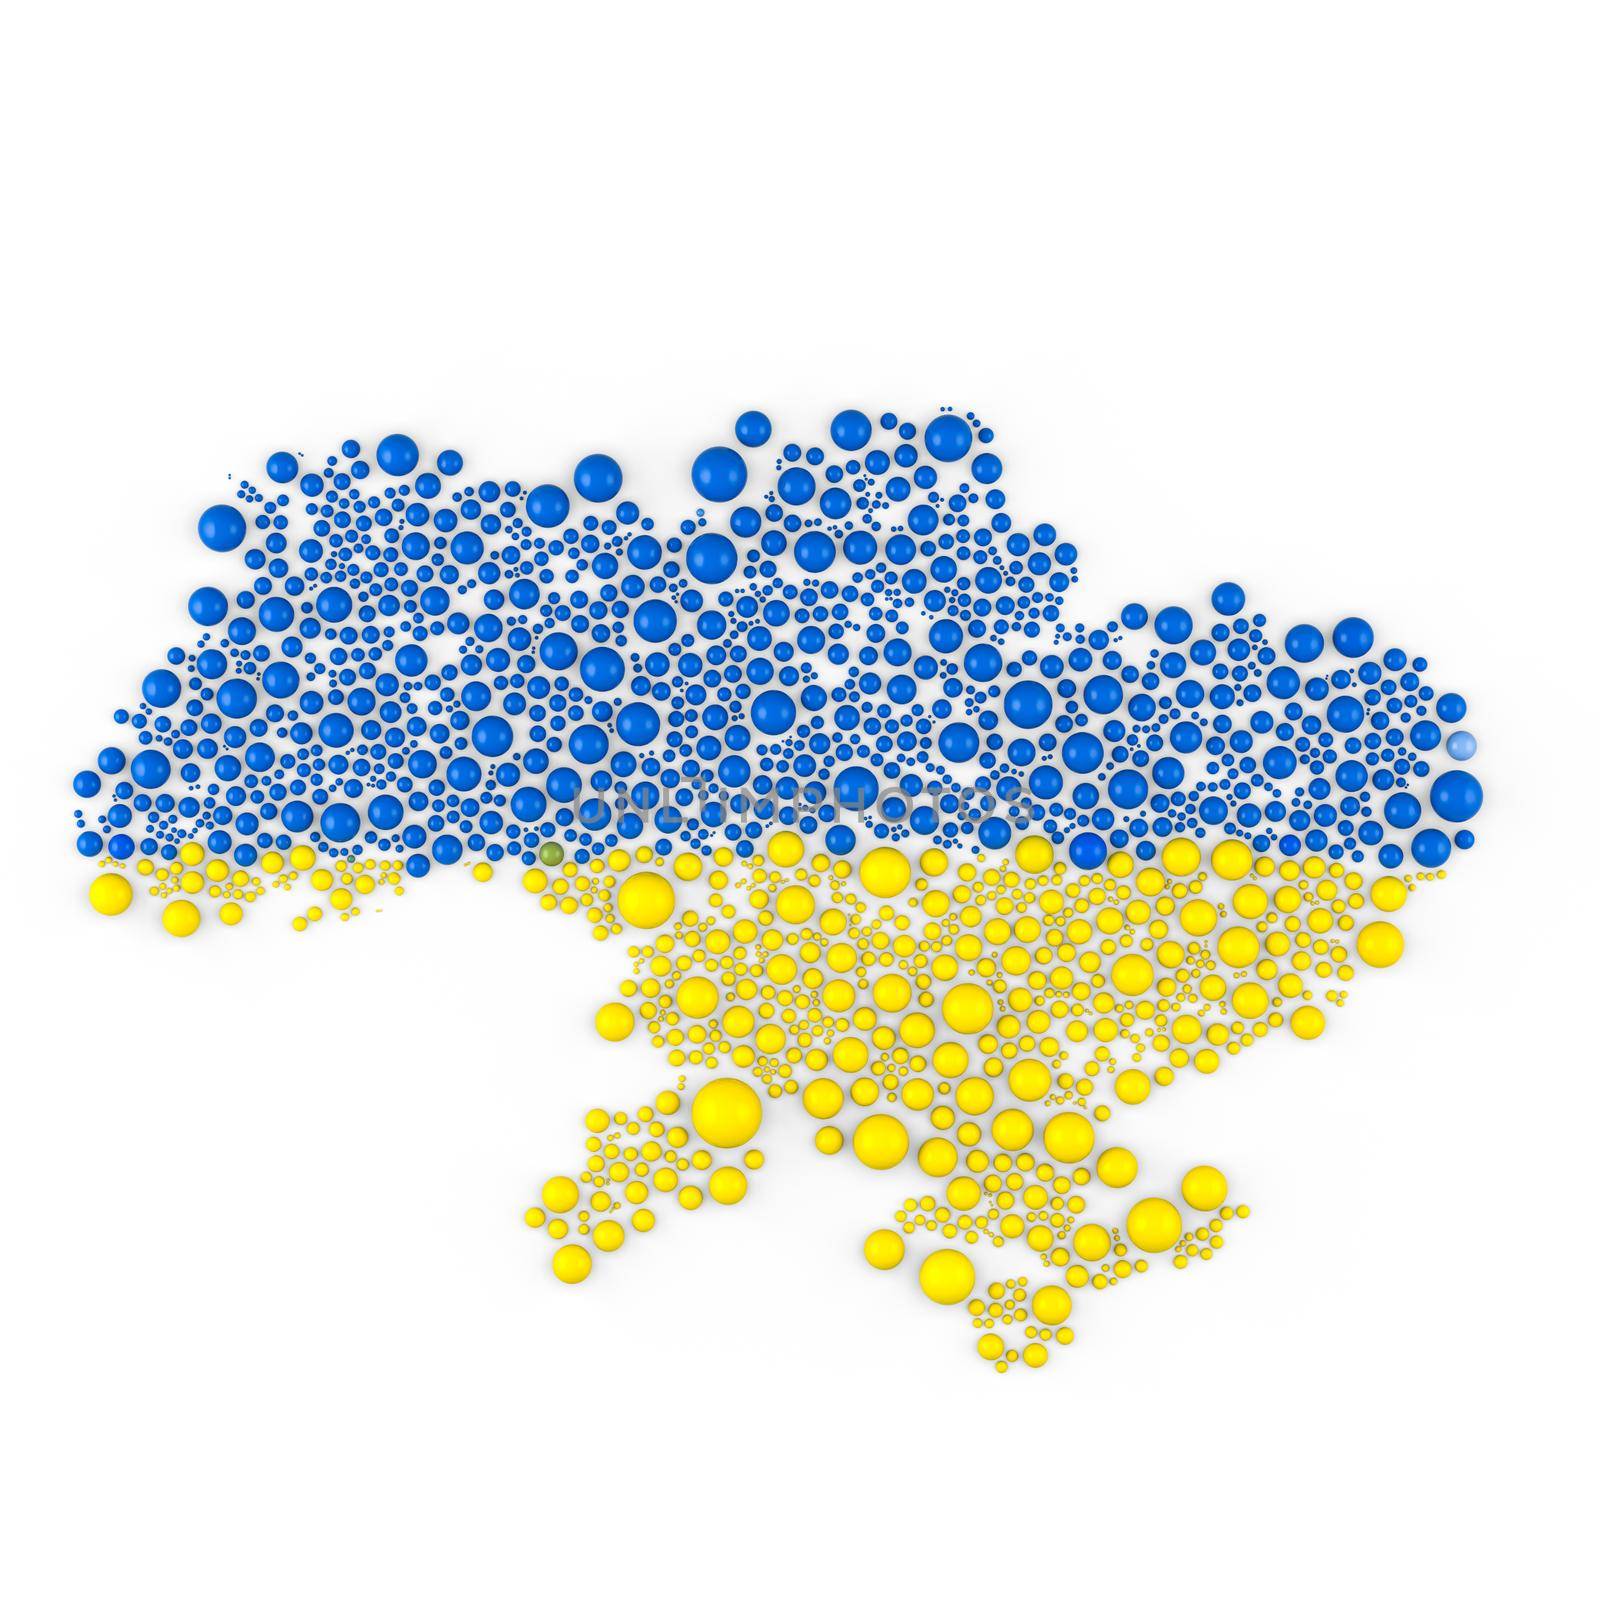 Multicolored raster abstract composition of Ukraine Map constructed of spheres items. Ukraine Map and flag 3D rendering illustration.